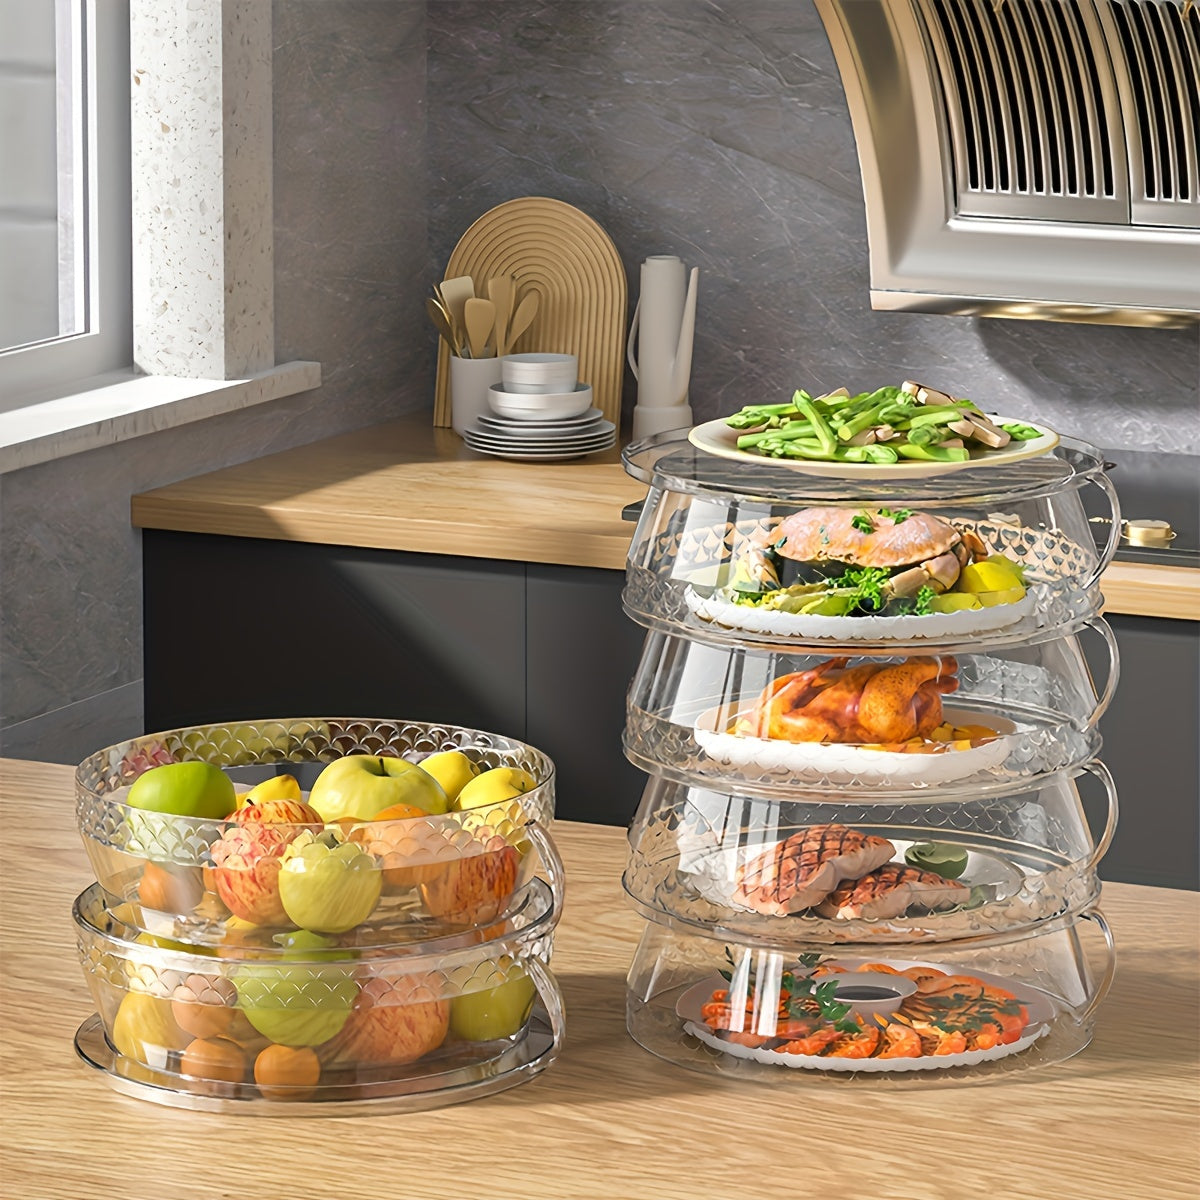 5pcs Stackable Food Cover, Transparent Dust-proof Serving Cover, Food Insulation Cover, Multi-functional Food Protection Cover